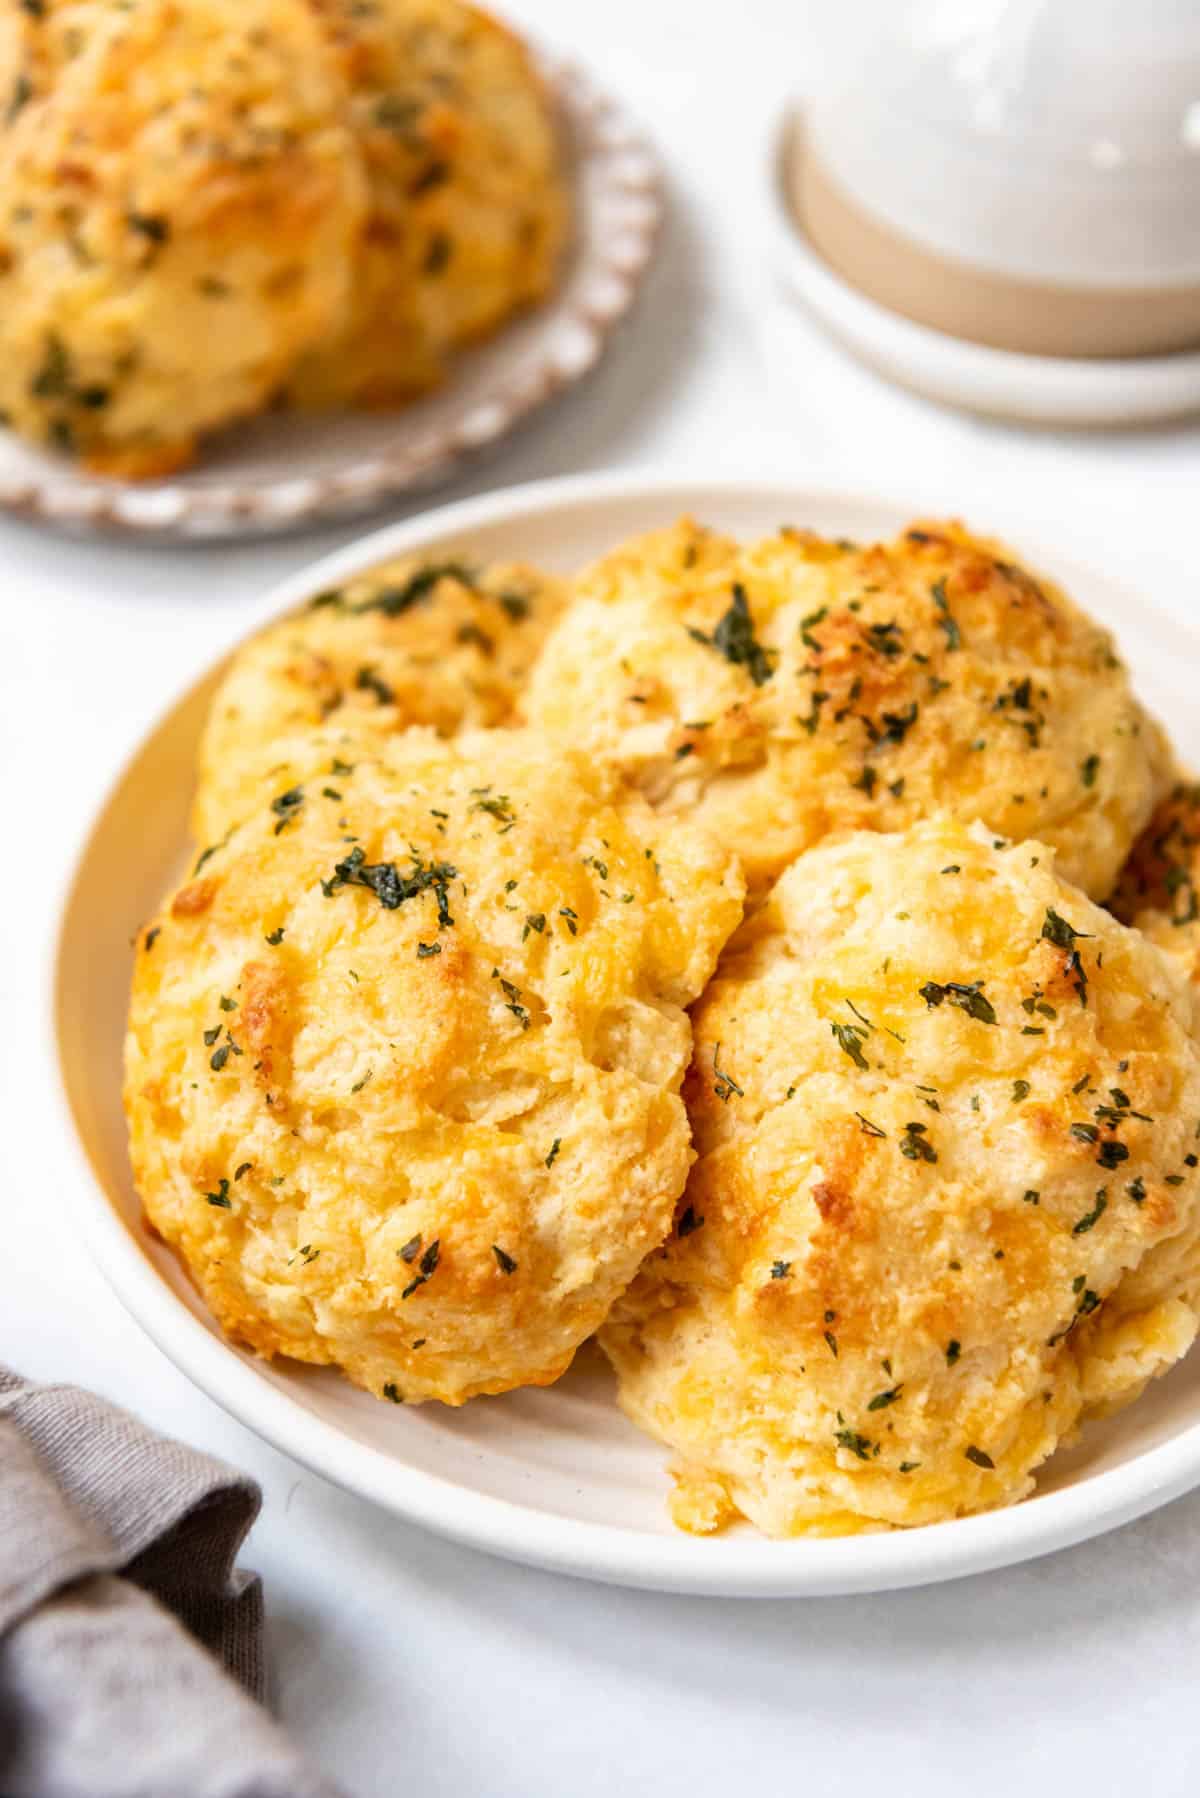 An image of cheddar bay biscuits piled on a plate.